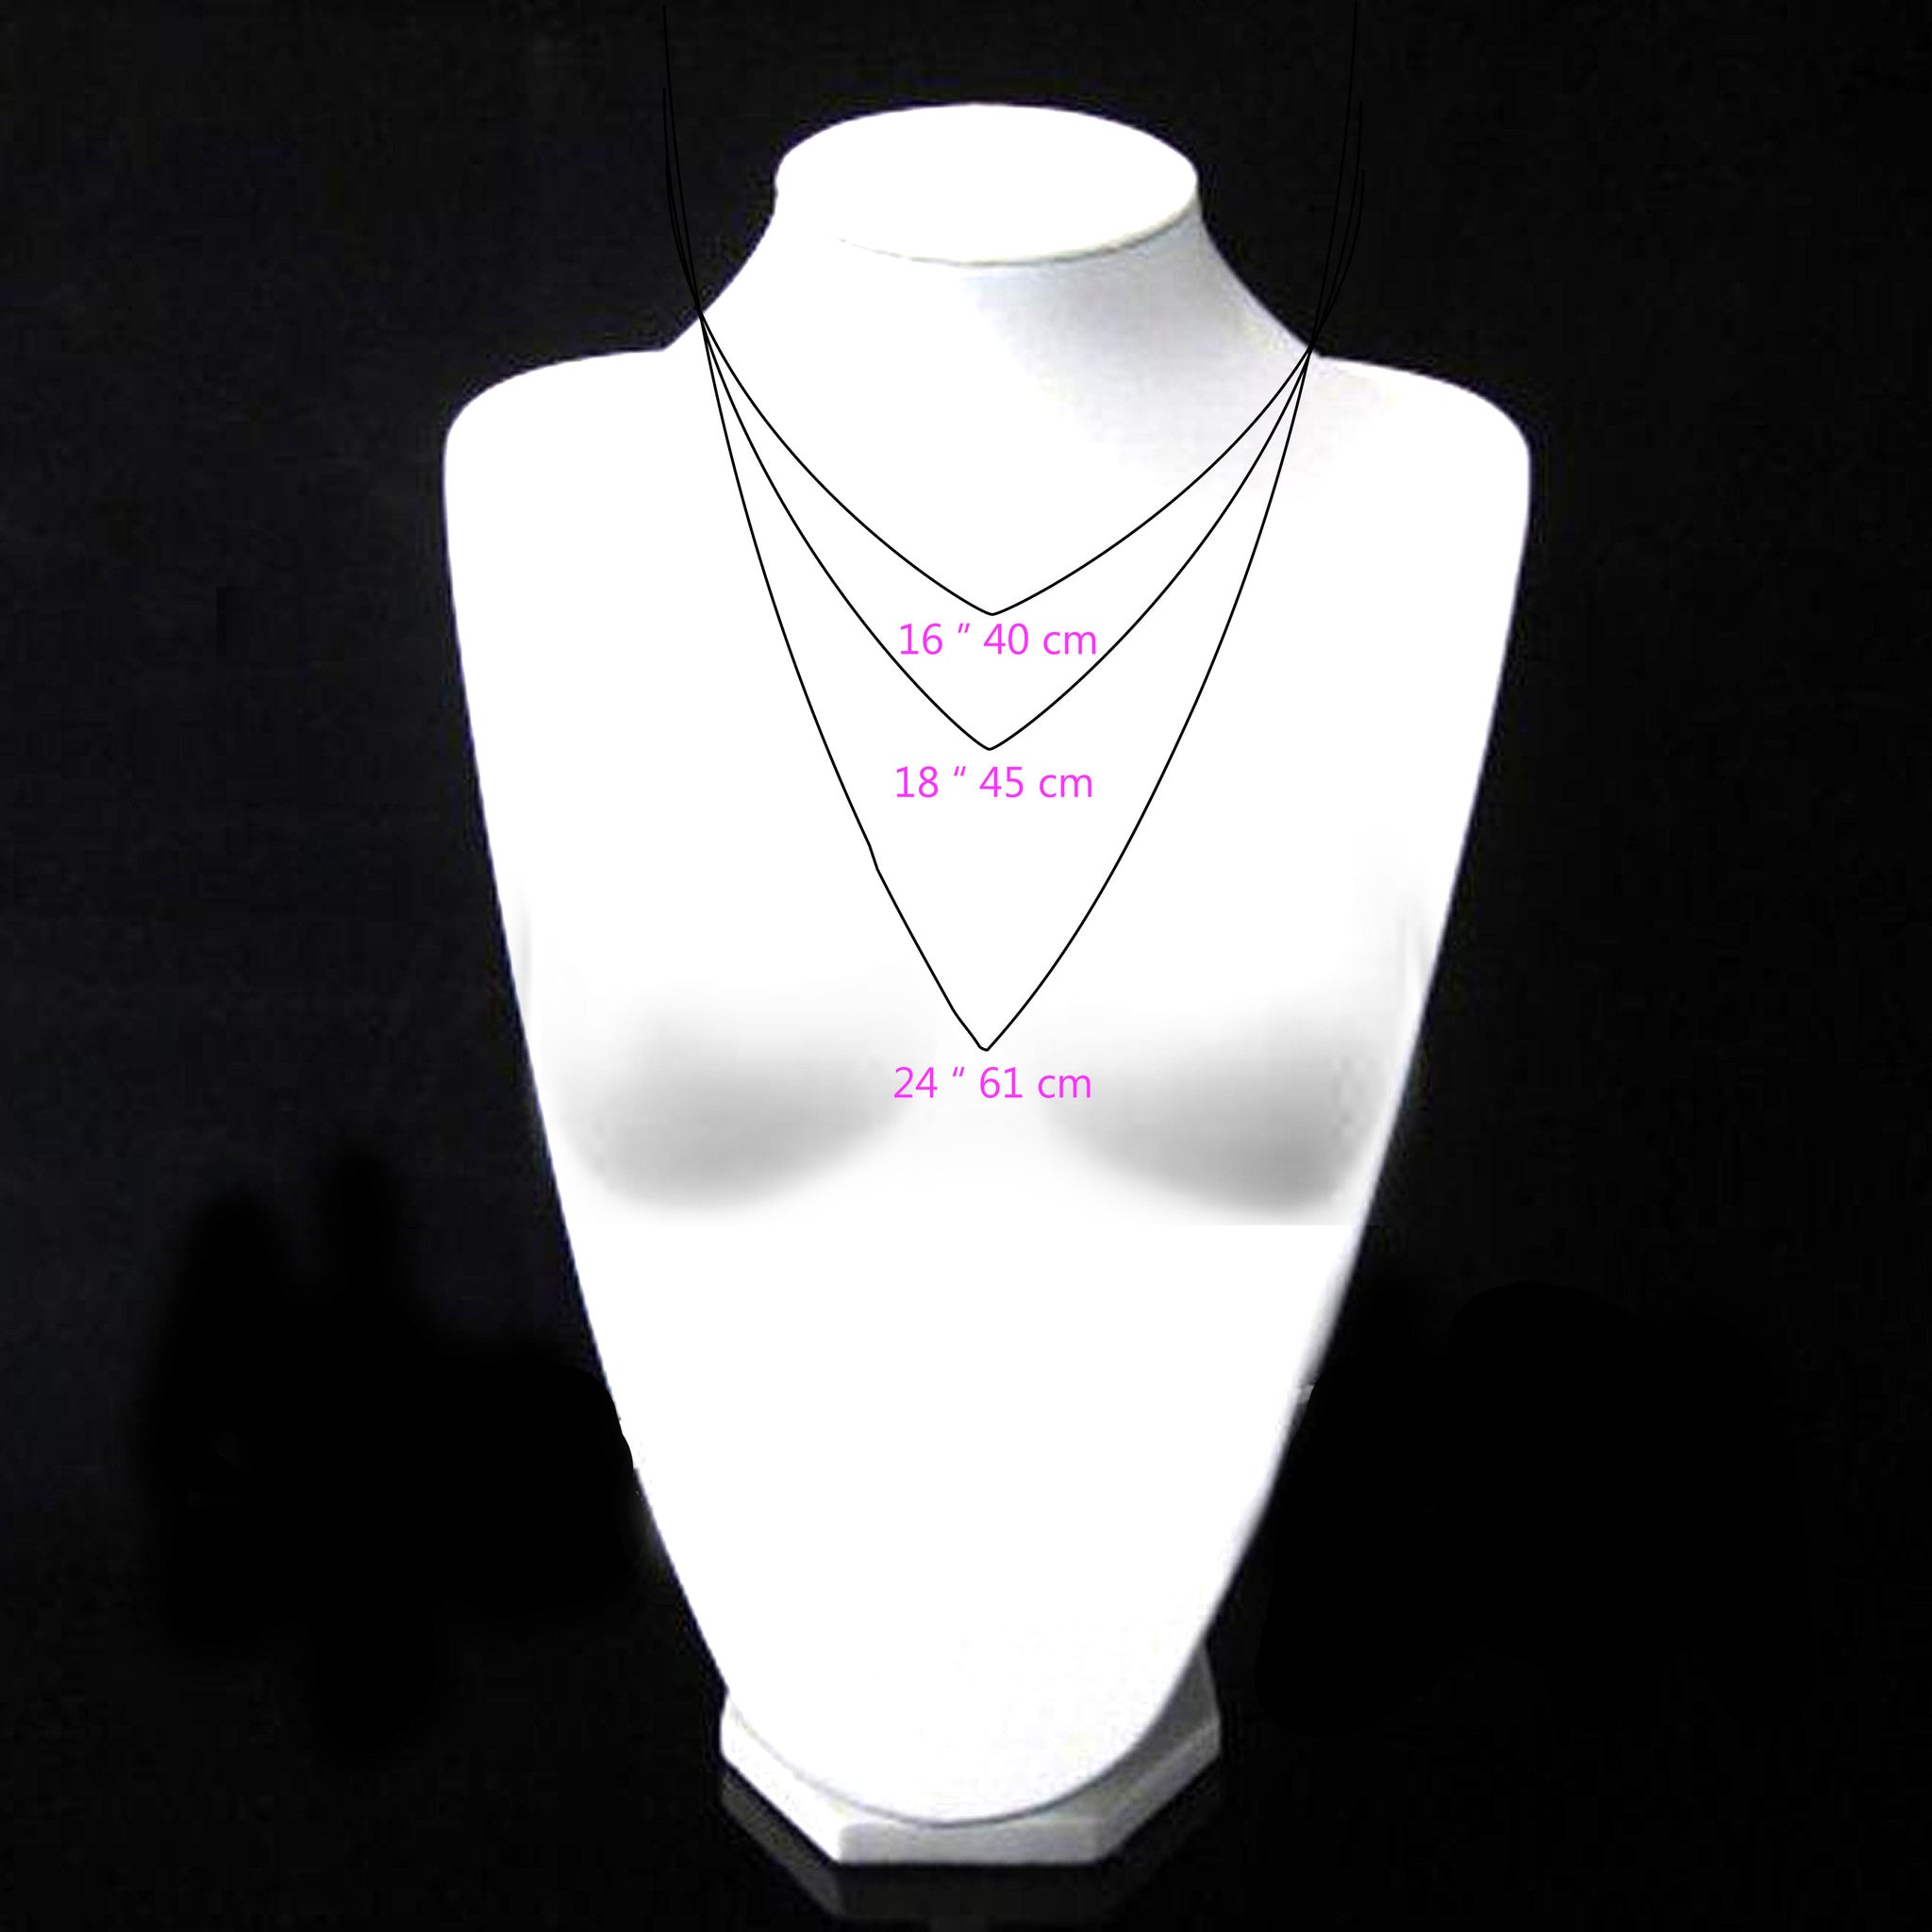 Necklaces - Big Power Triangle Pendant & Helen Chain Necklace